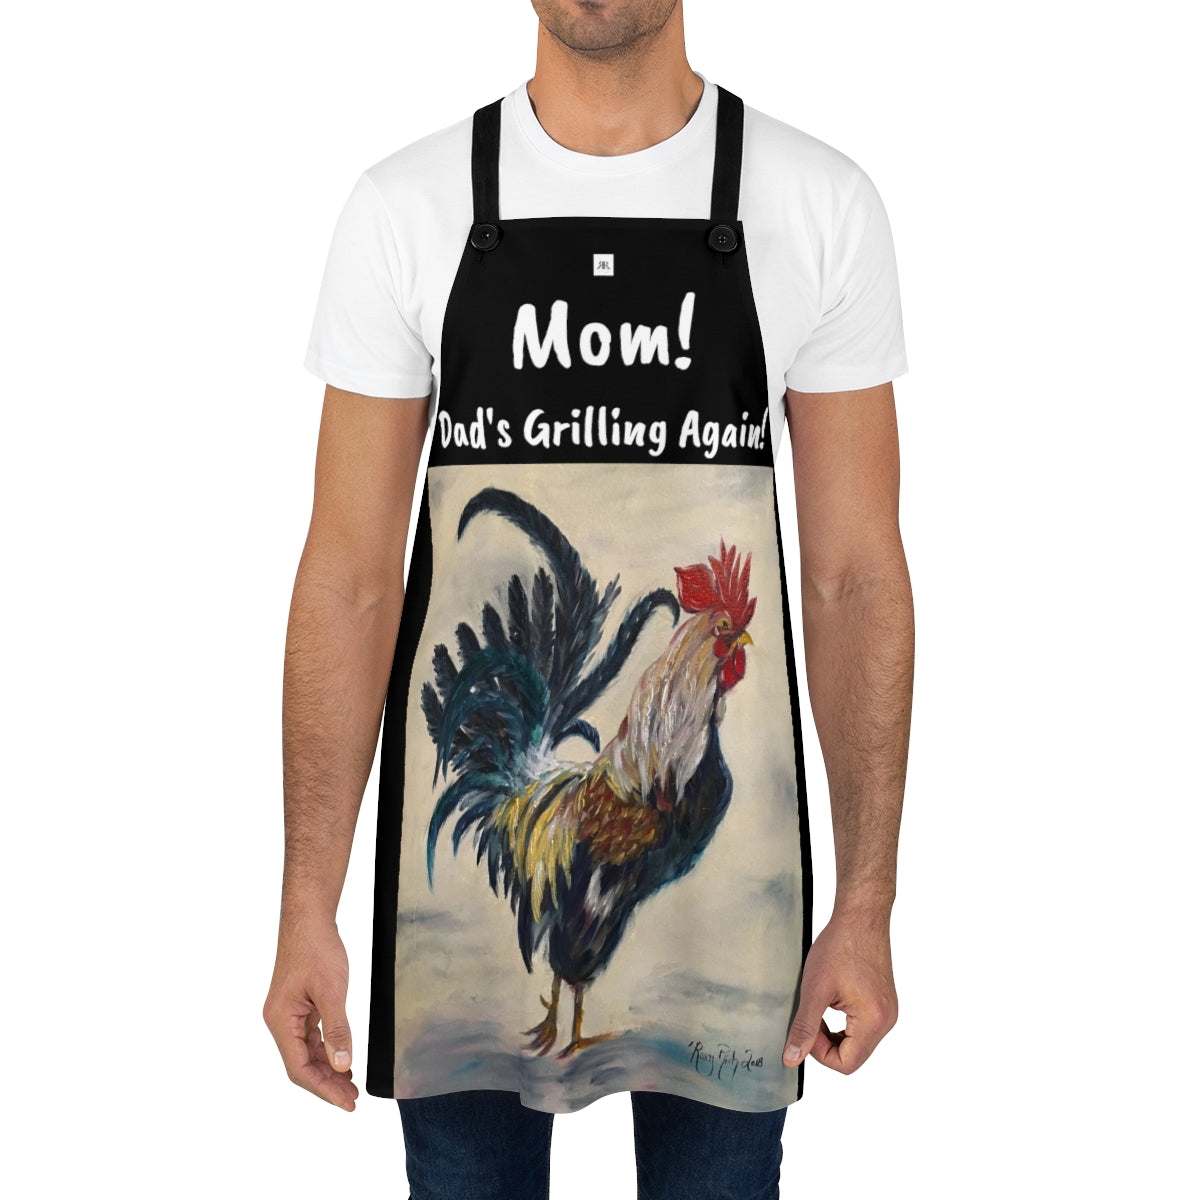 Mom!  Dad's Grilling Again!  saying with Original Rooster Painting  Boss Printed on a black cooking Apron Fathers Day Gift